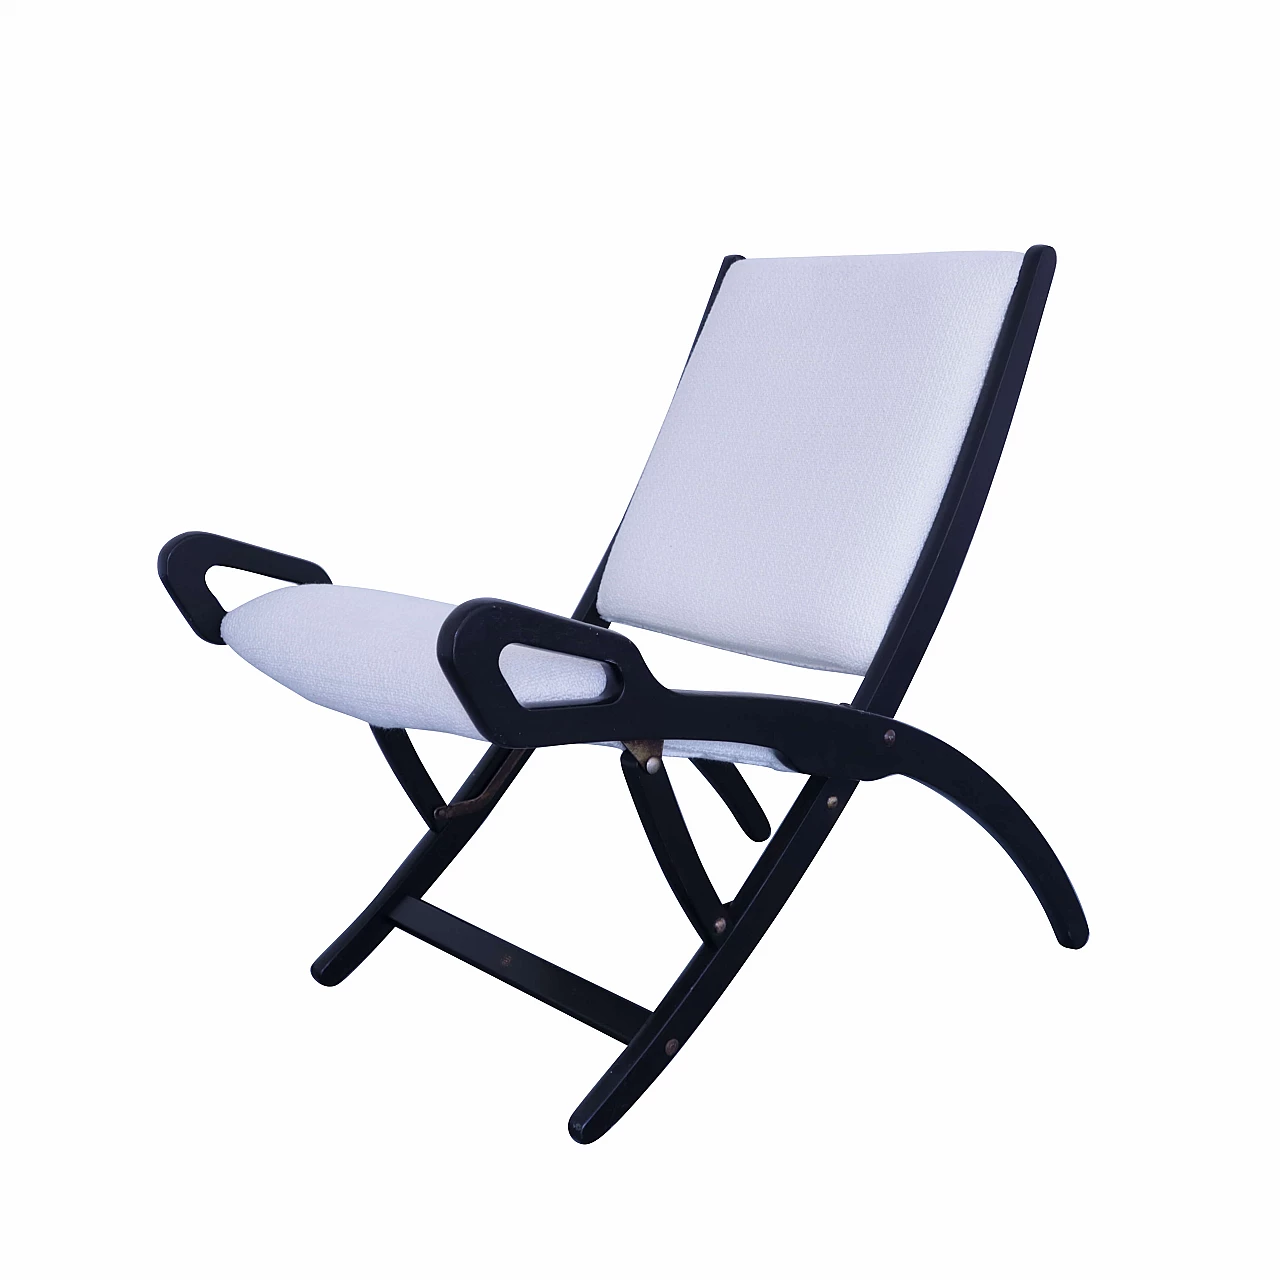 Ninfea folding armchair by Gio Ponti for Reguitti, with label 1111920